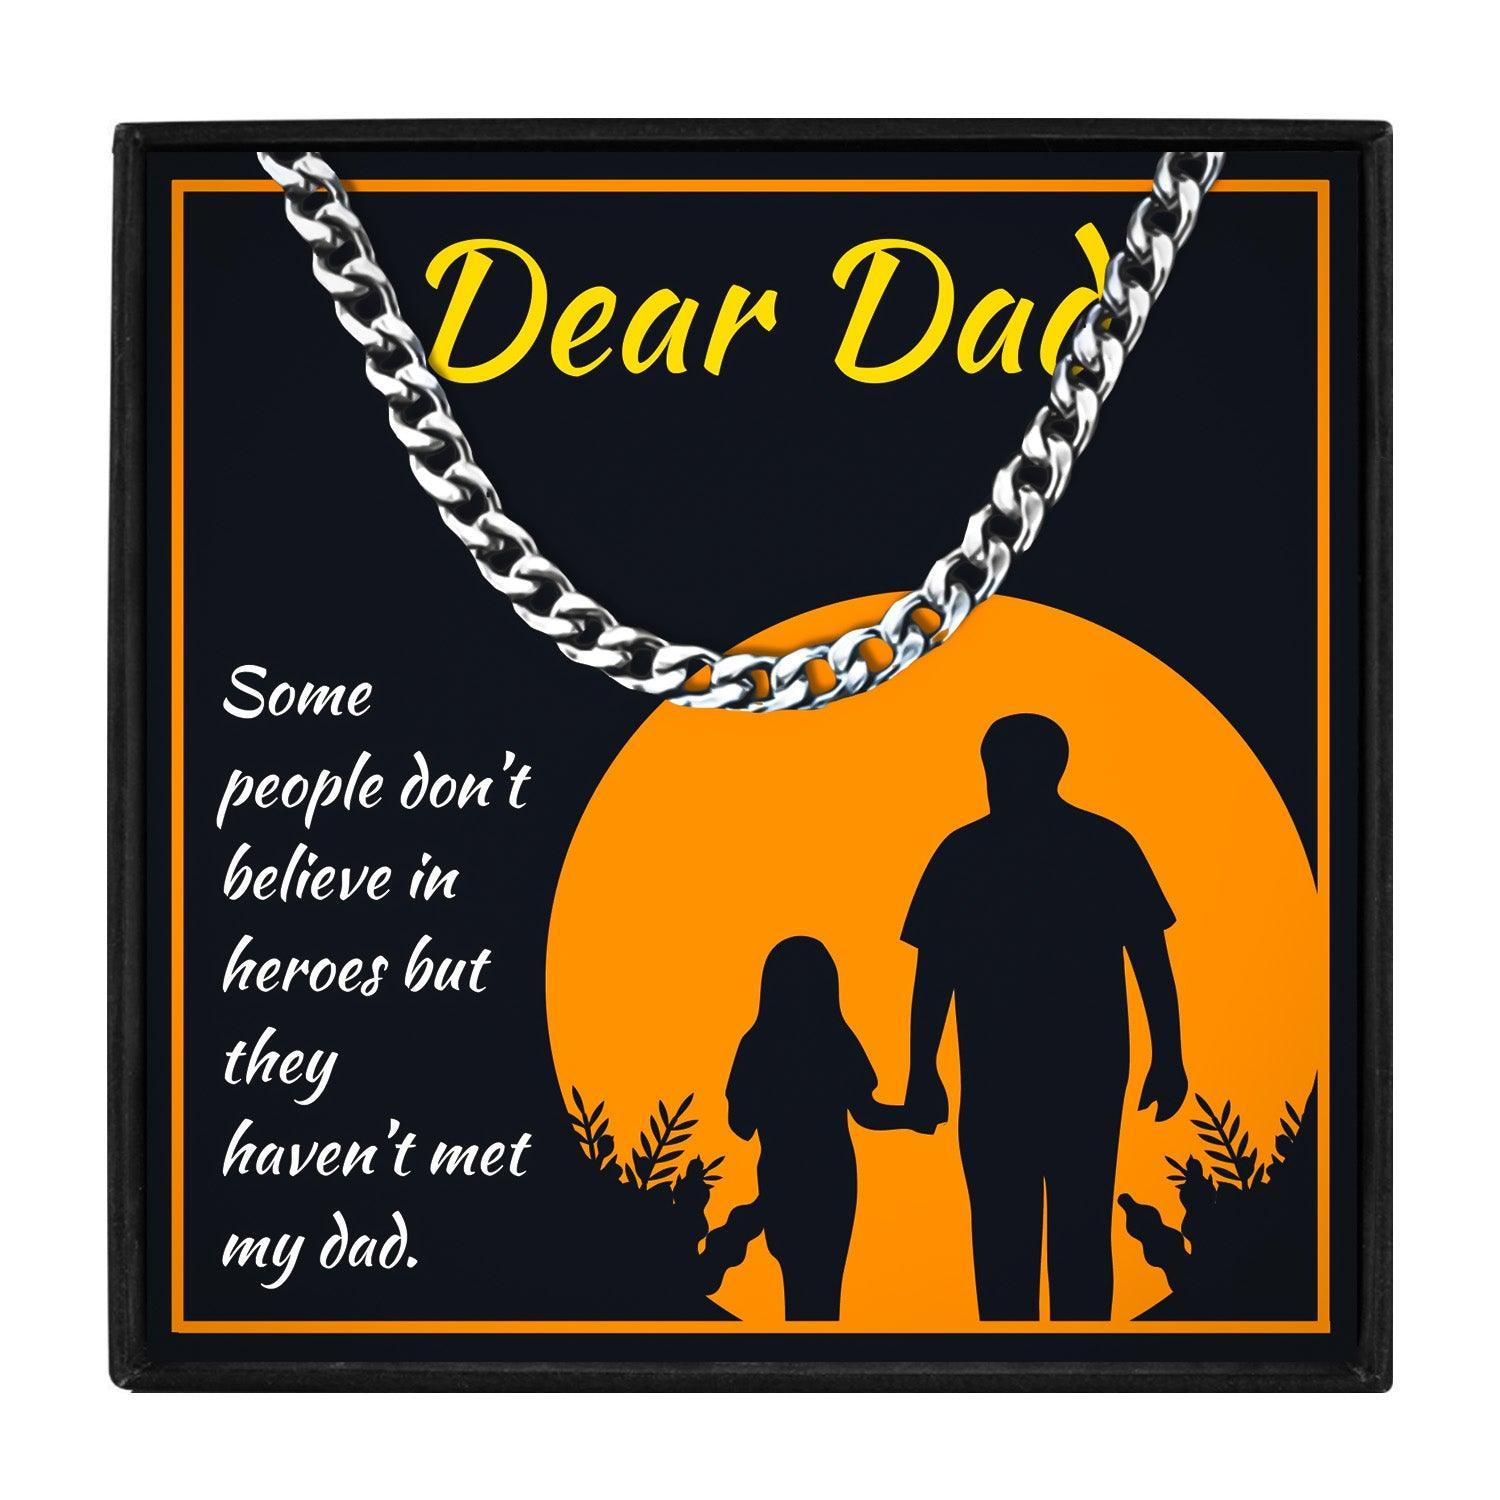 To My Dad Necklace Jewelry Gift From Daughter in 2023 | To My Dad Necklace Jewelry Gift From Daughter - undefined | dad birthday gift, dad necklace from daughte, dad necklaces, dad pendant, father daughter necklace, father's day necklace | From Hunny Life | hunnylife.com